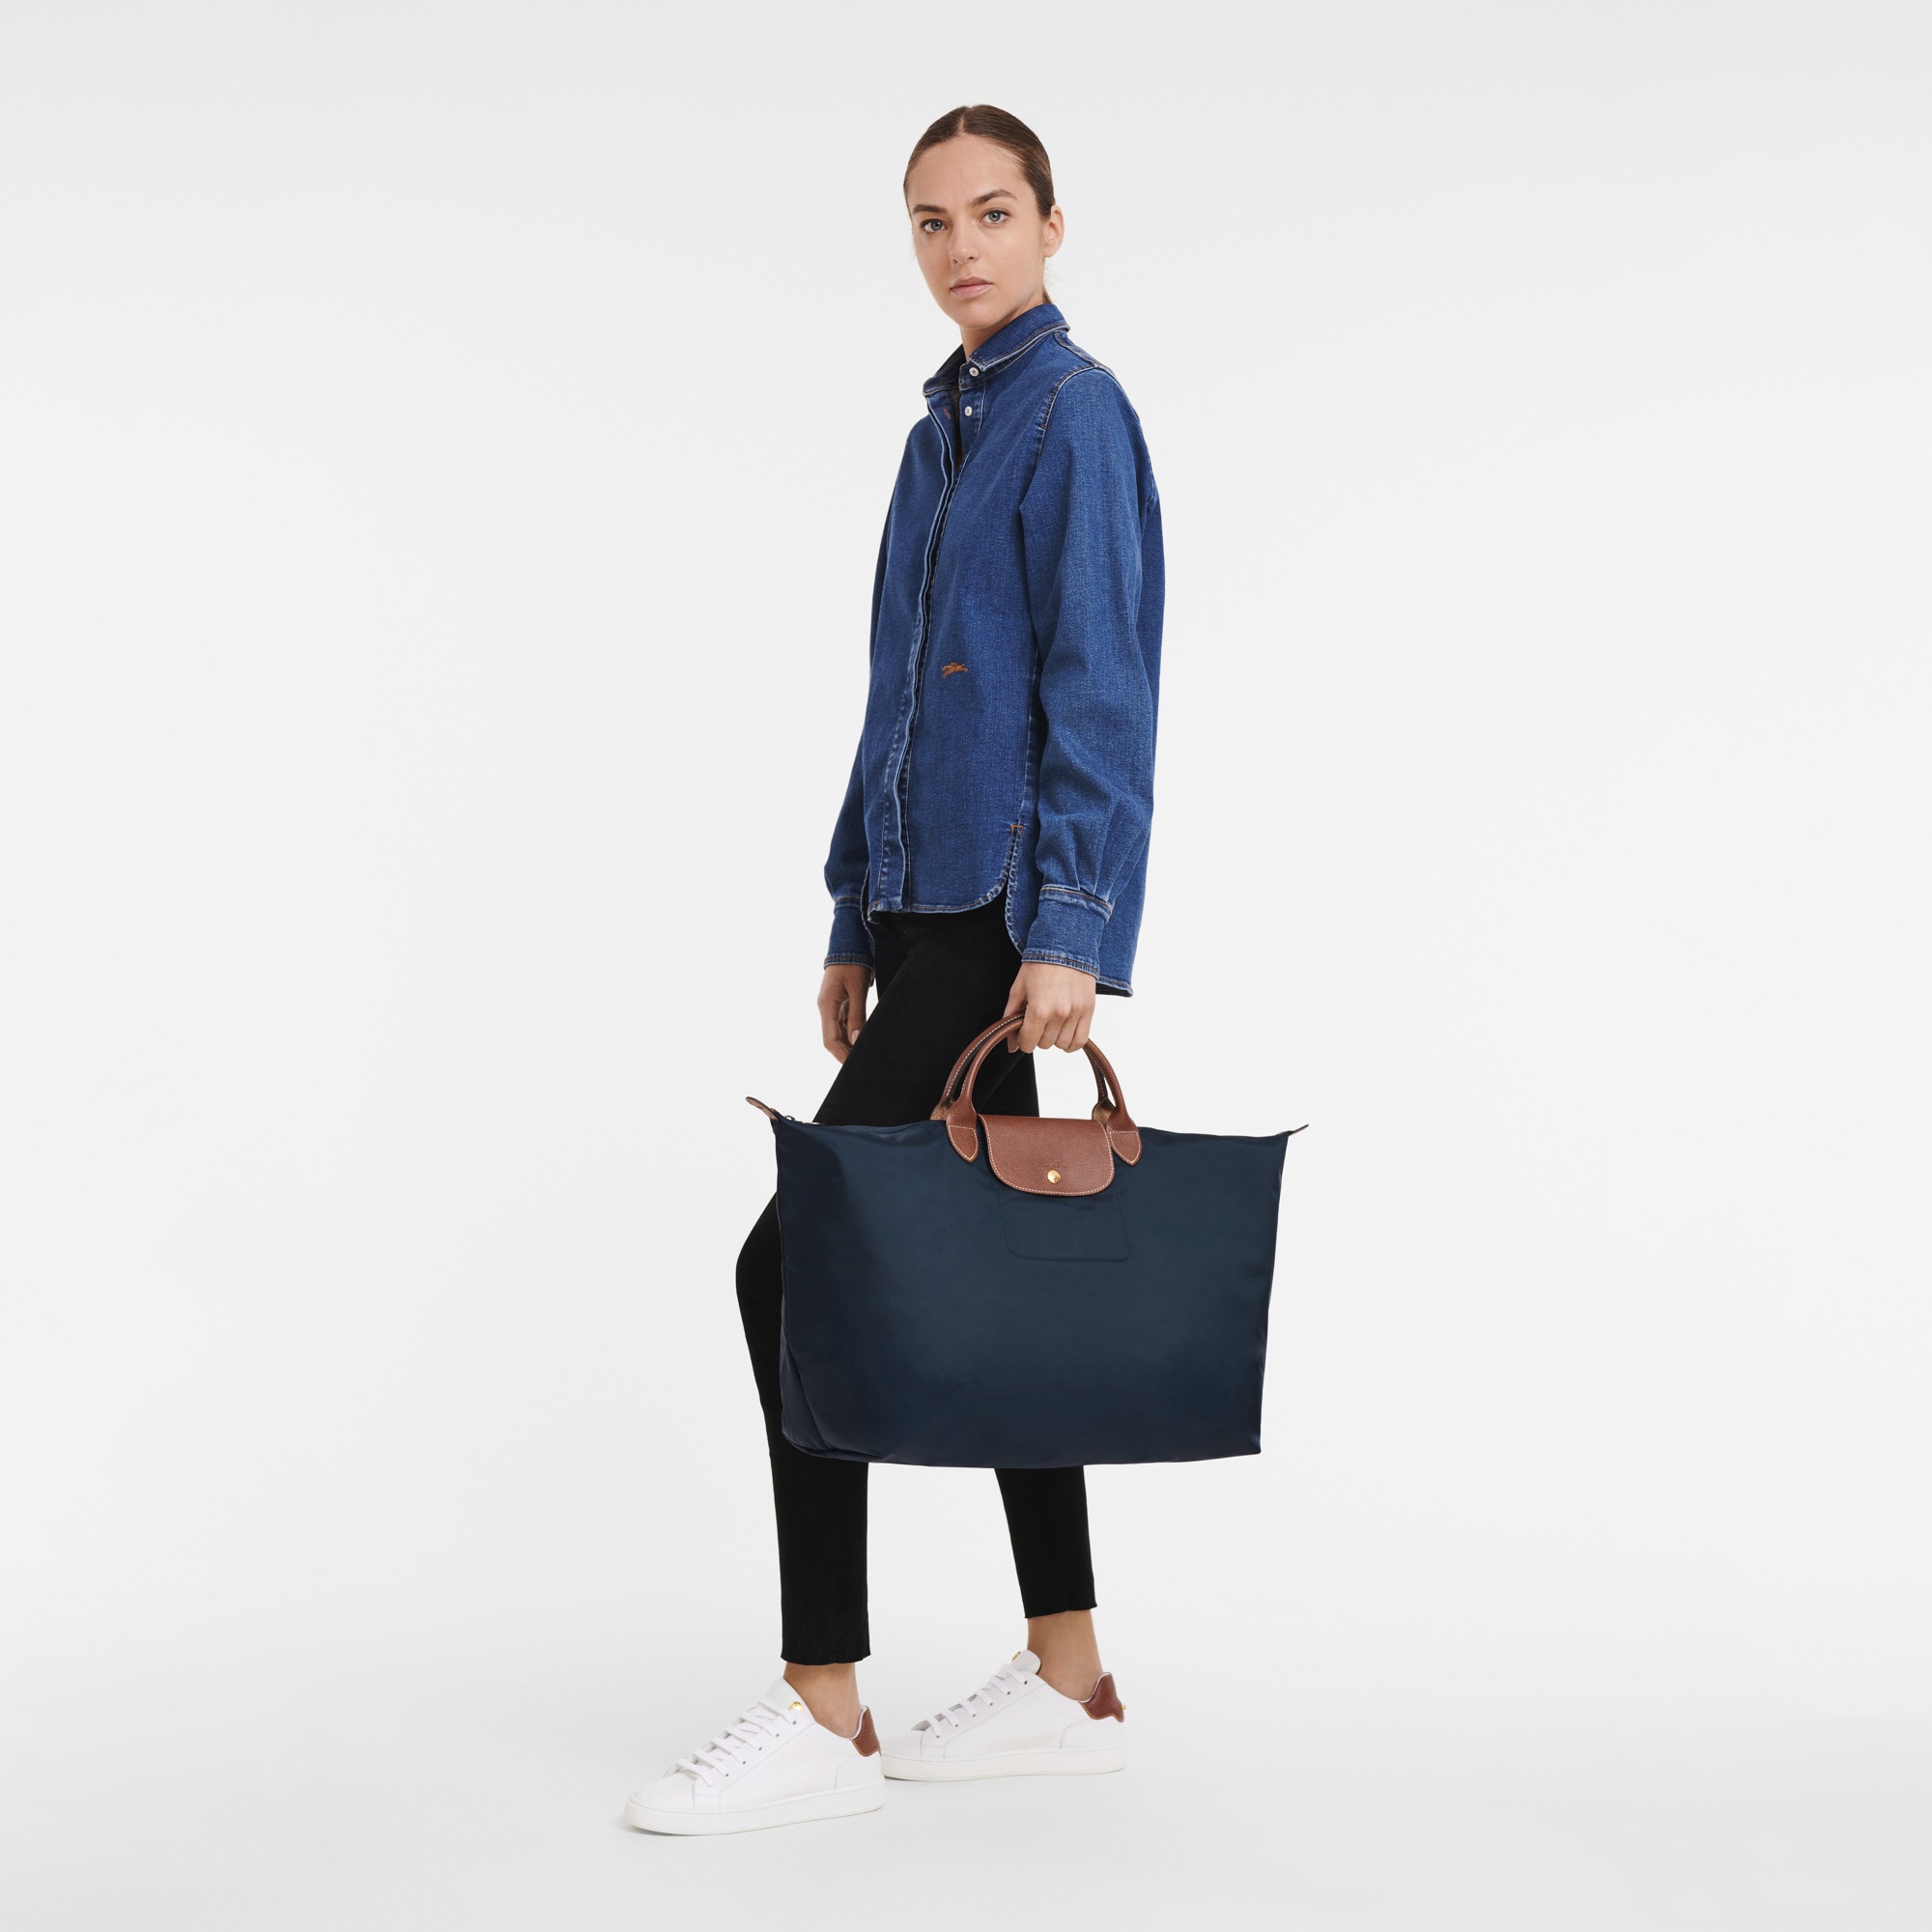 Le Pliage Original S Travel bag Navy - Recycled canvas - 2